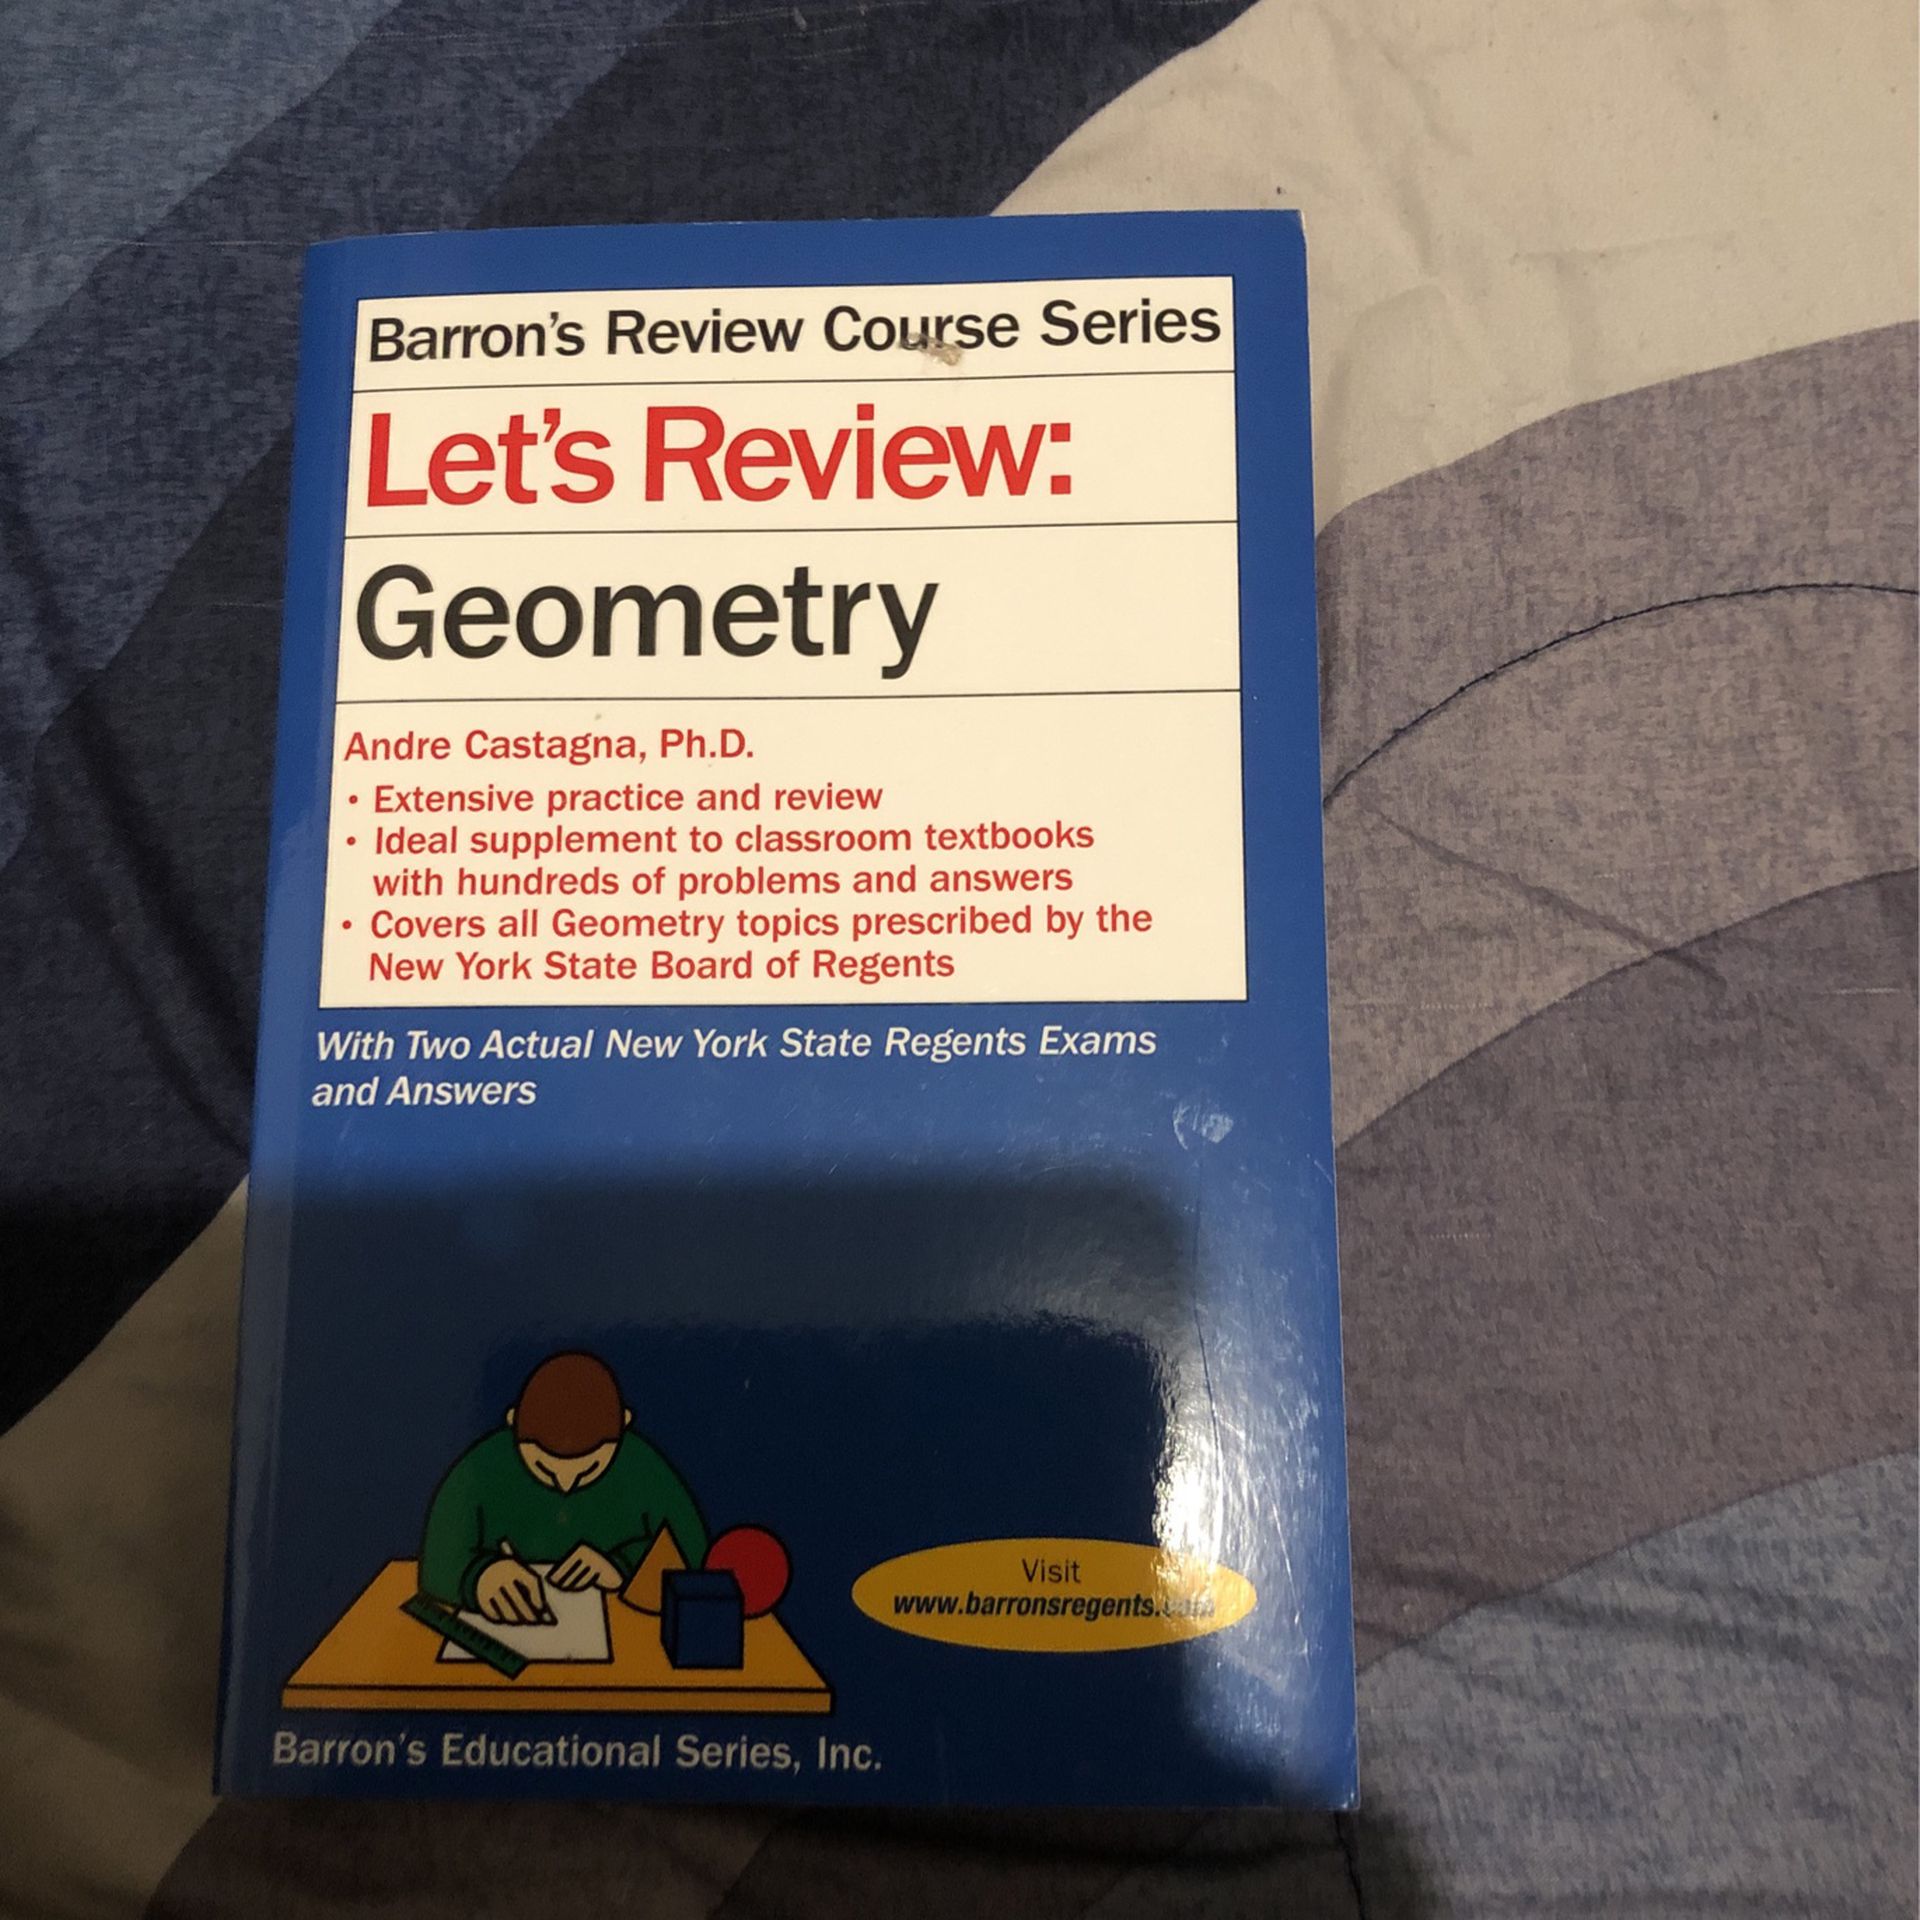 Barron's　New　York,　Review　in　Geometry　for　Book　Sale　NY　OfferUp